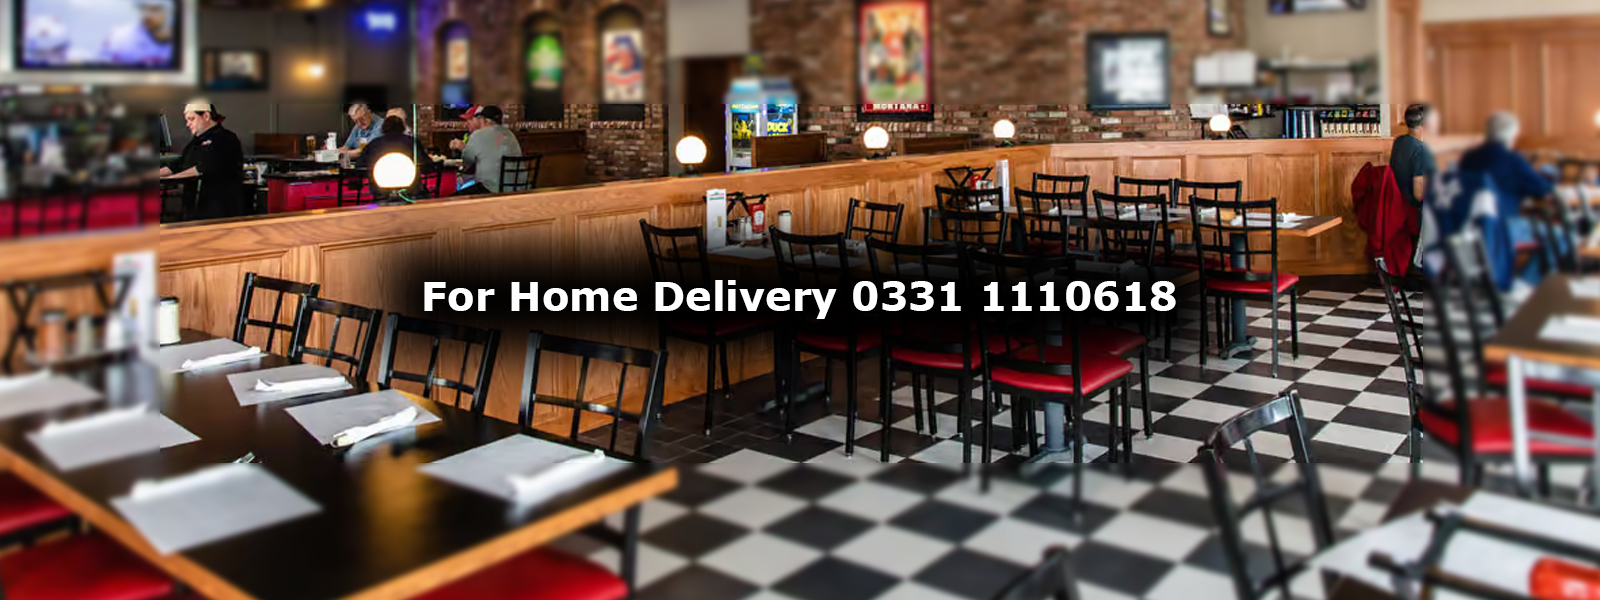 pizza-m21-wapda-town-lahore-to-order-call-0331-1110618